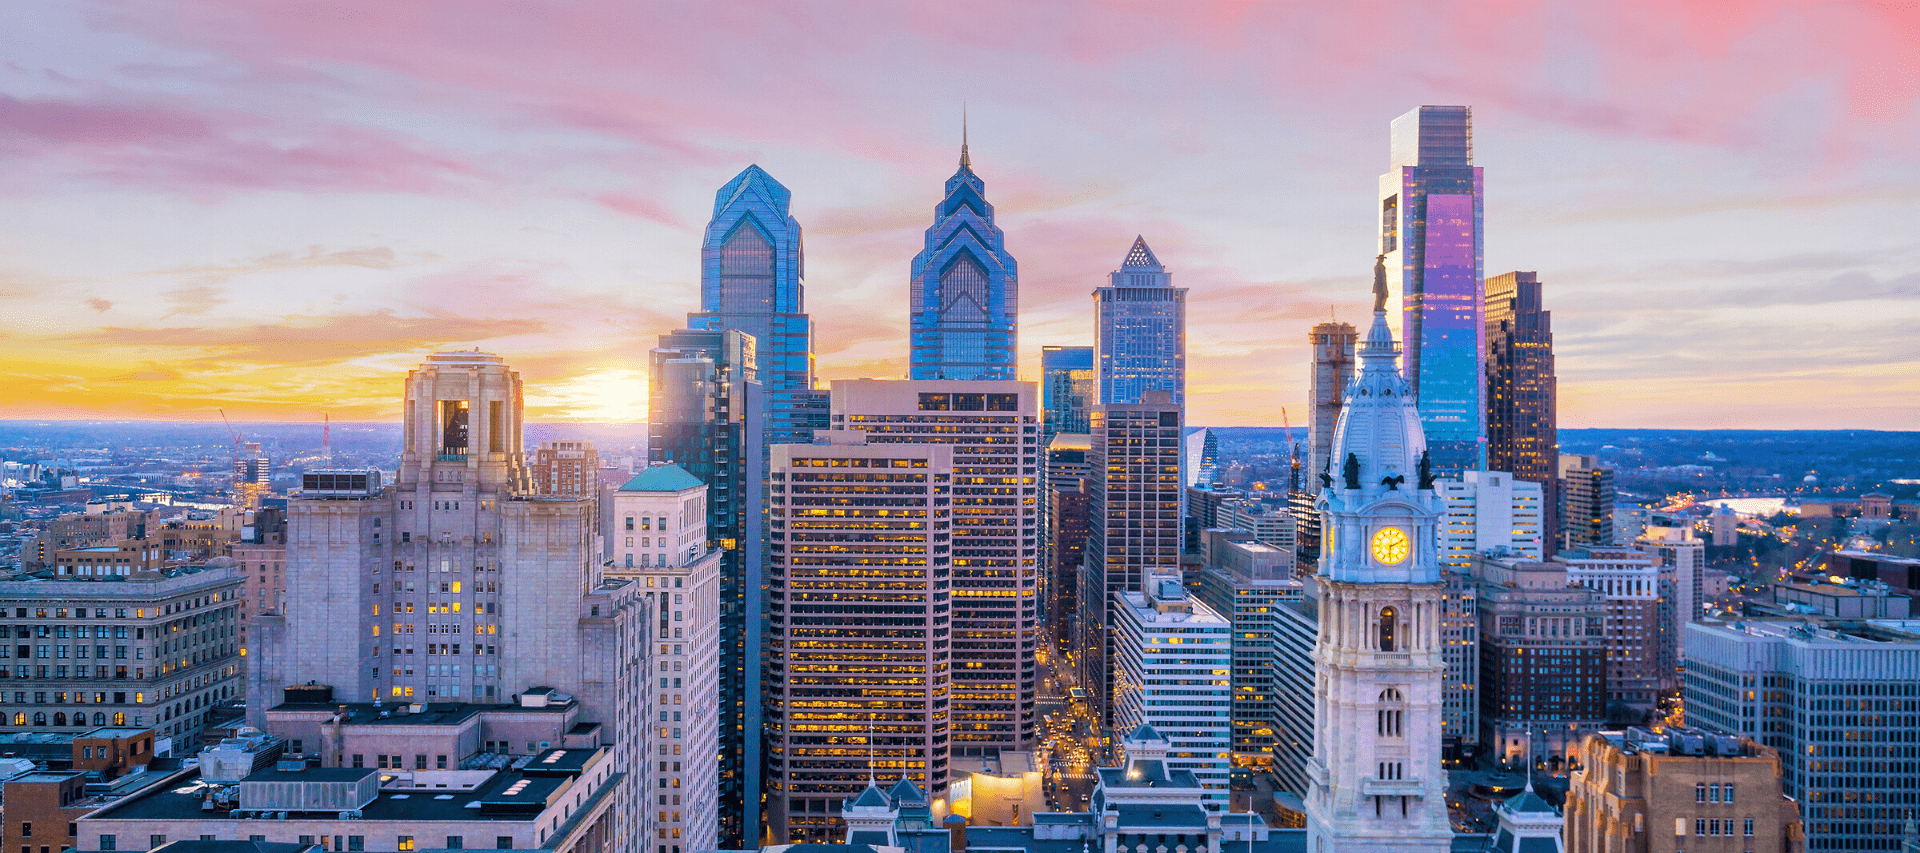 Top 10 Things to Do in Philadelphia